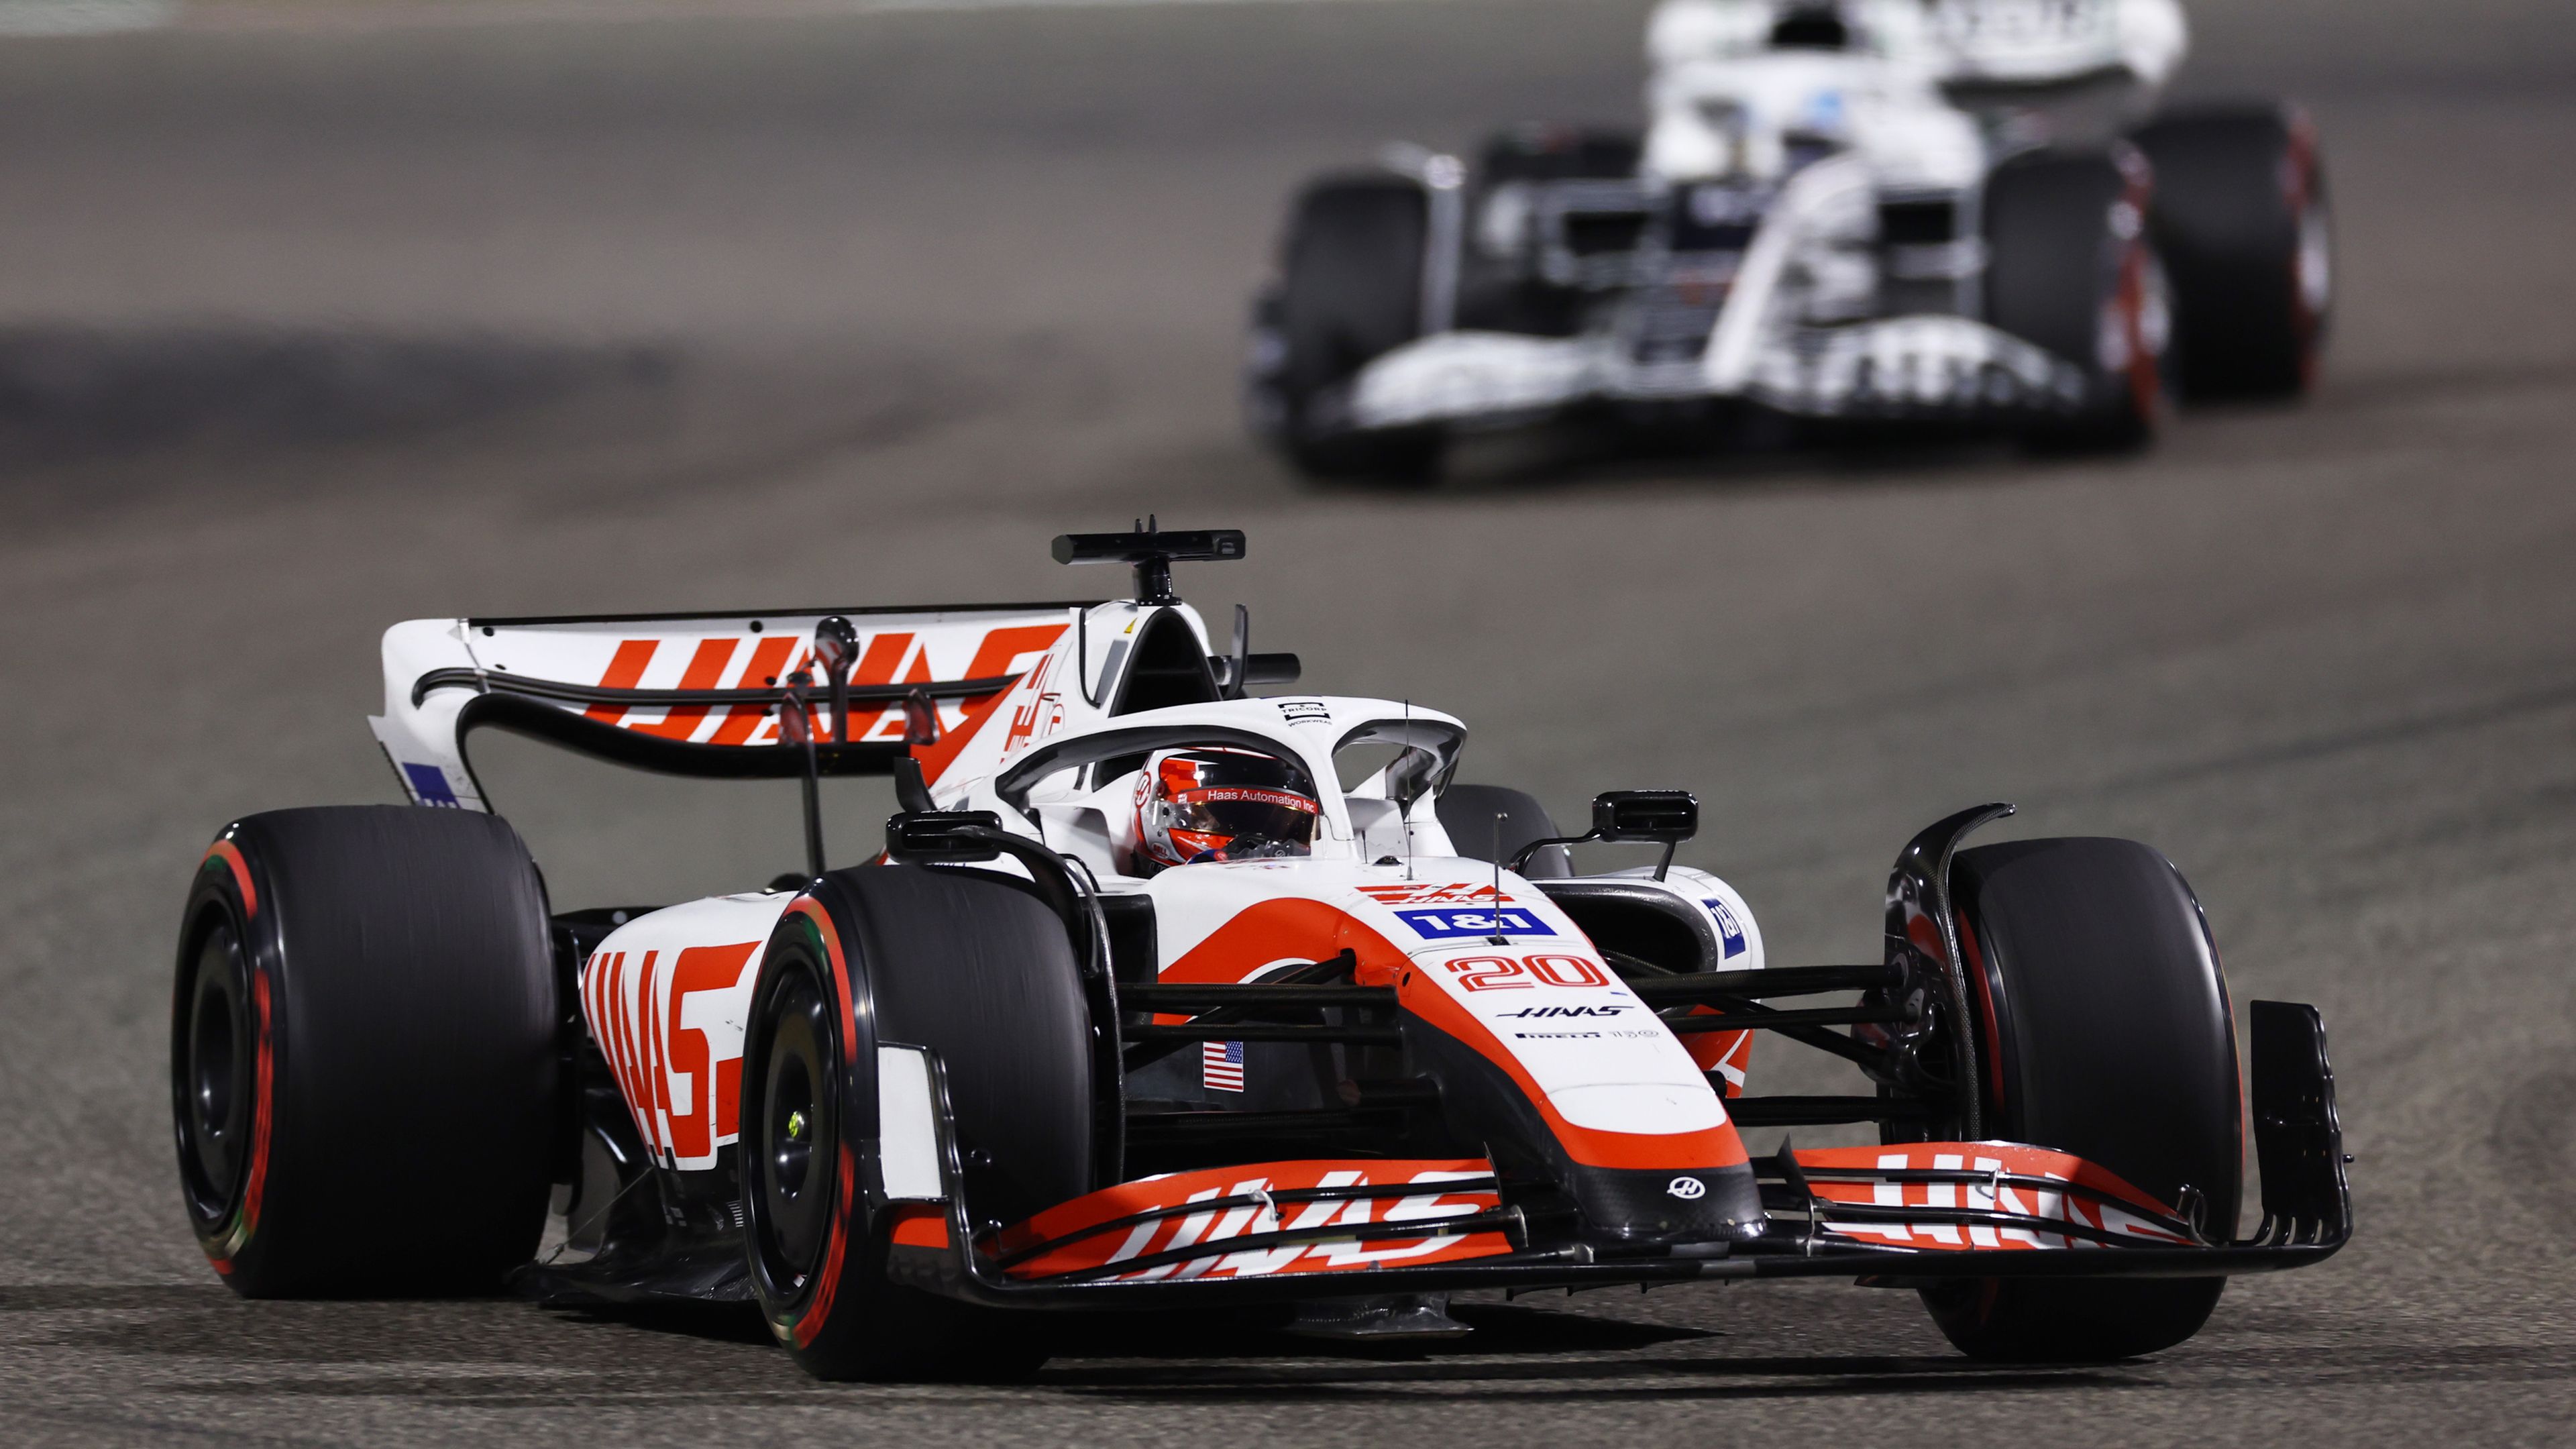 Haas driver Kevin Magnussen shakes up F1 standings with 'unbelievable' fifth place